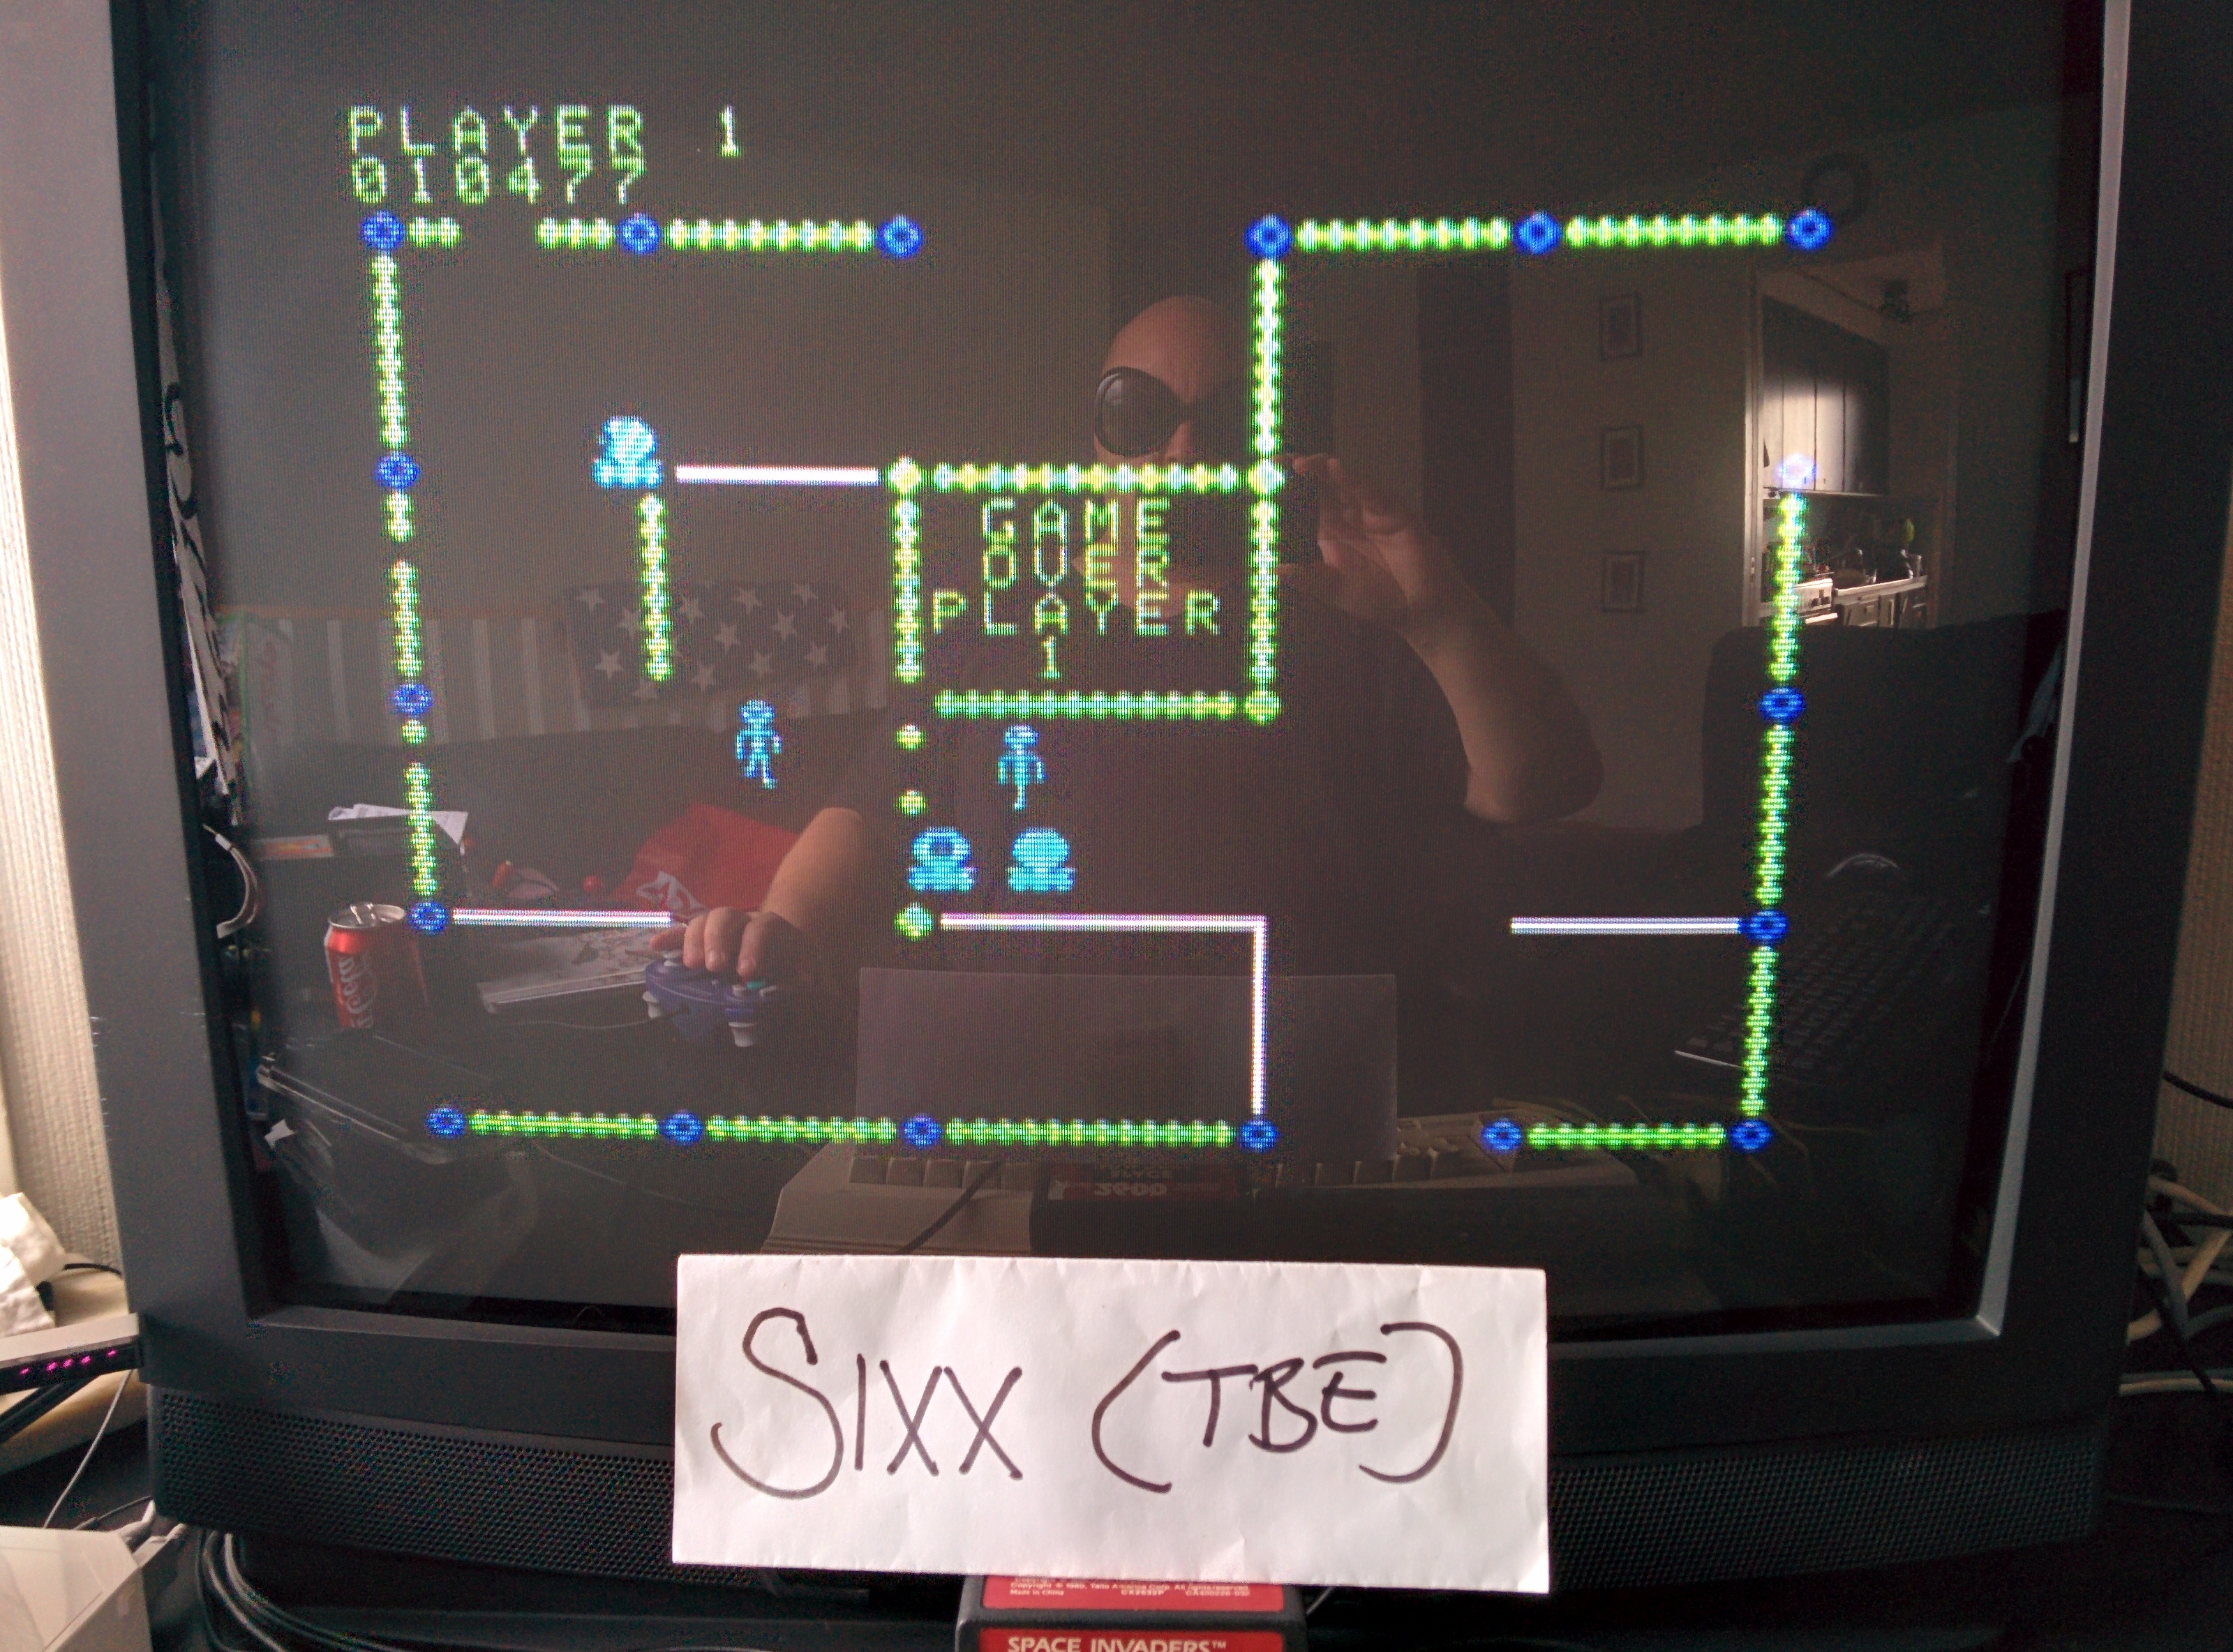 Sixx: Frenzy (Colecovision Emulated) 10,477 points on 2014-07-26 09:11:41